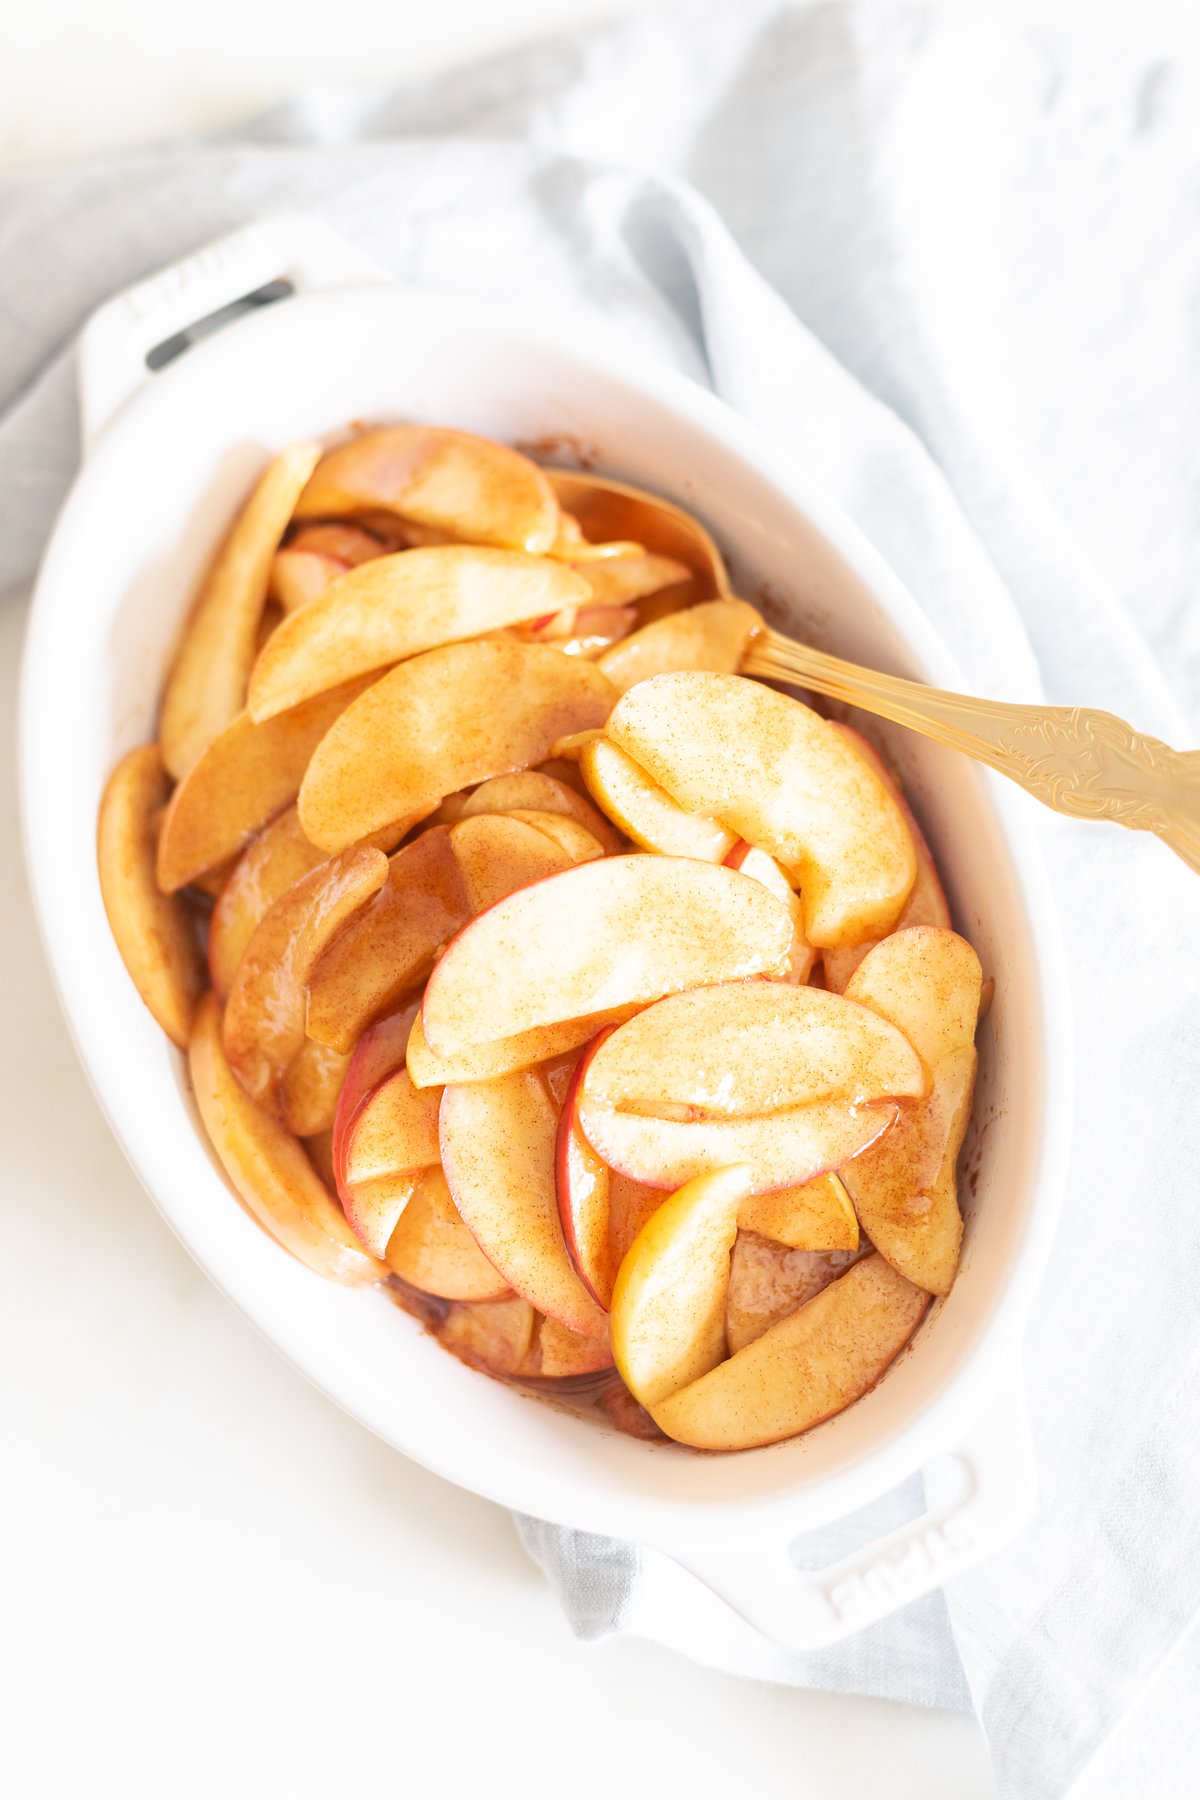 Baked apple slices in a white bowl with a spoon.